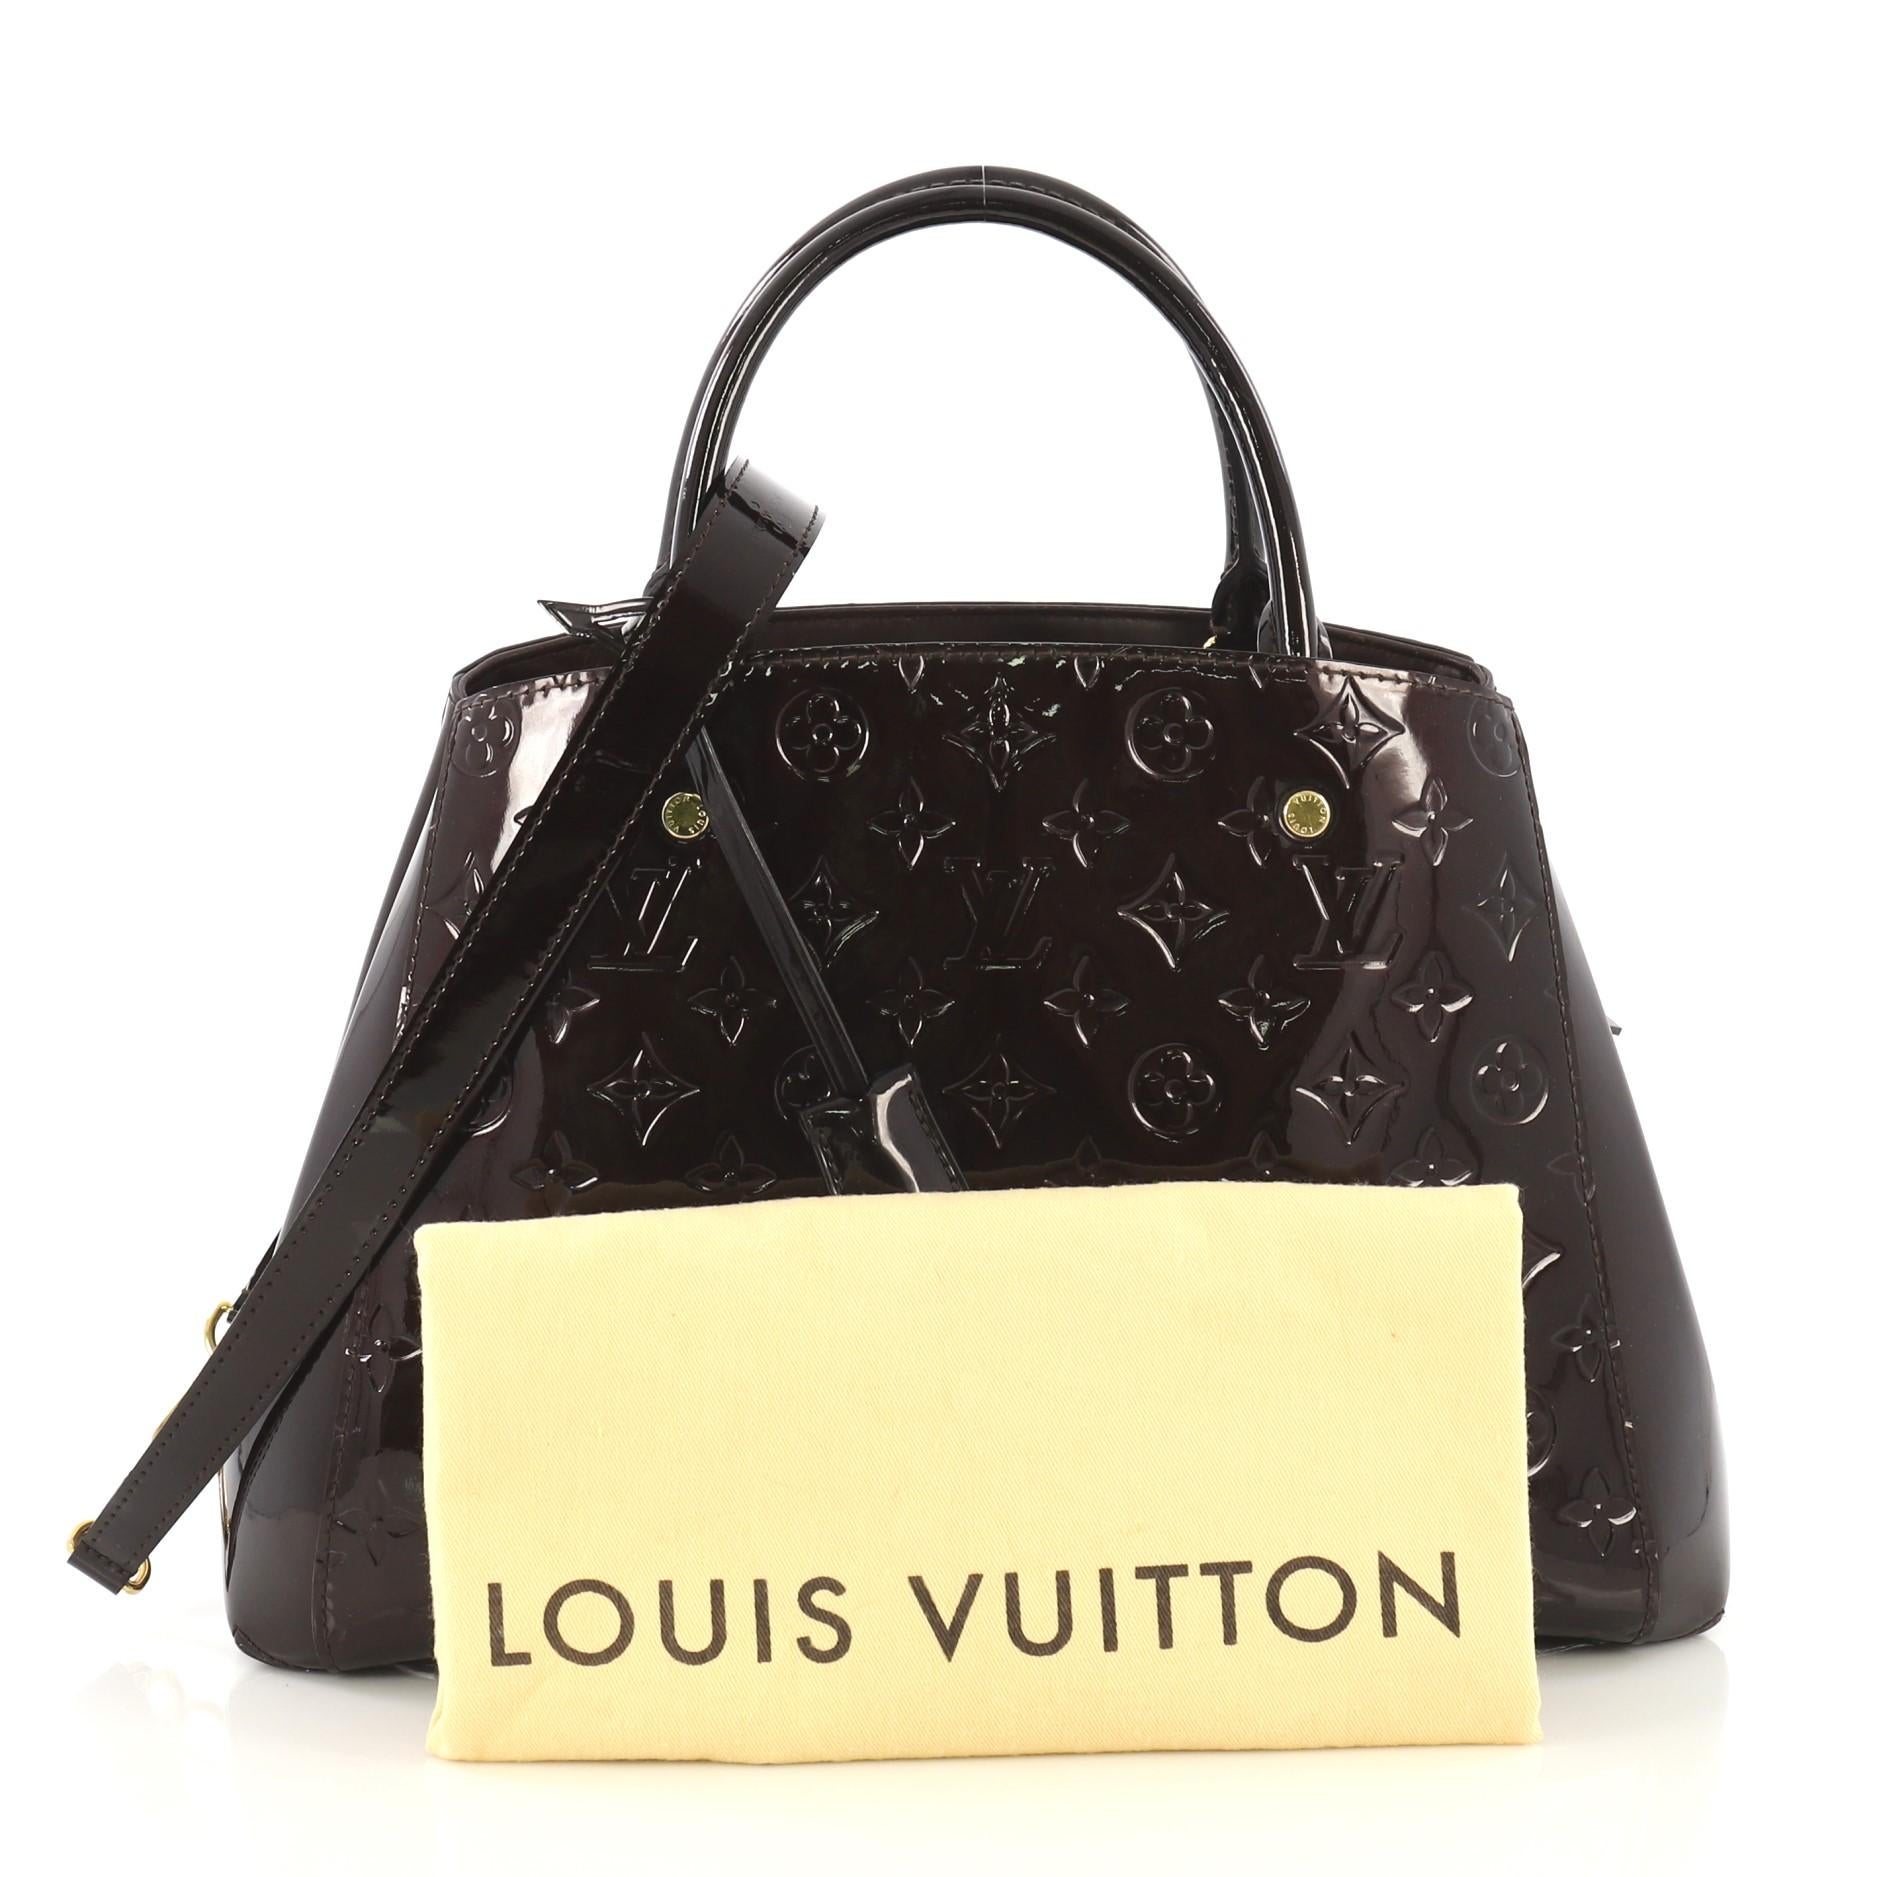 This Louis Vuitton Montaigne Handbag Monogram Vernis MM, crafted from purple monogram vernis leather, features dual rolled handles, protective base studs, and gold-tone hardware. Its hook clasp closure opens to a purple fabric interior divided into